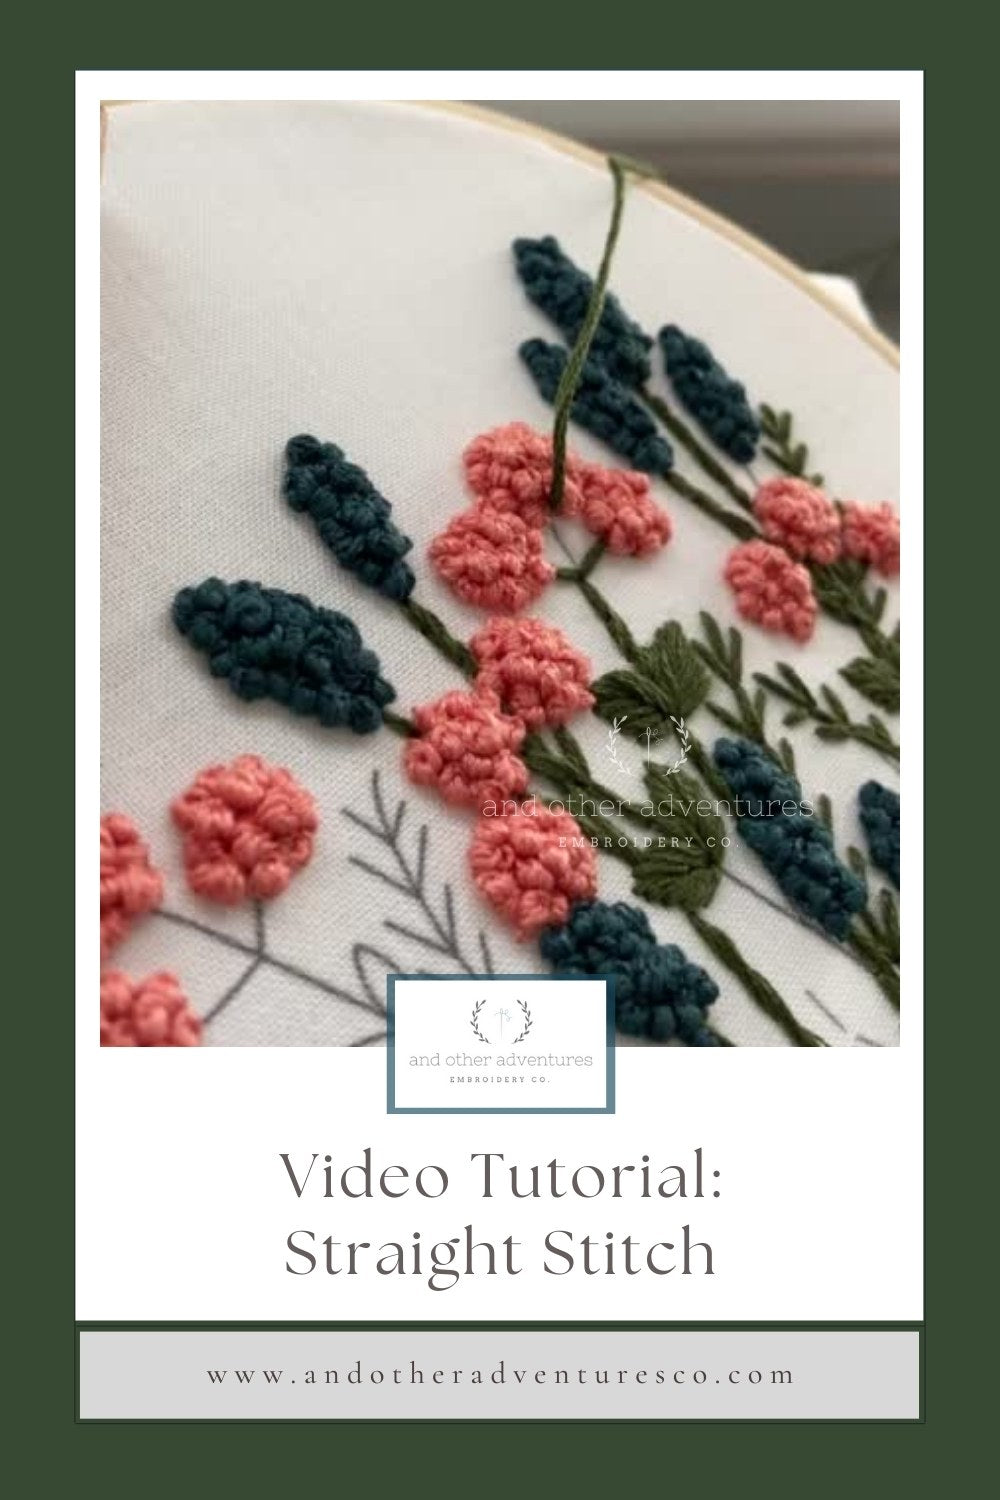 Video Tutorial: Straight Stitch by And Other Adventures Embroidery Co